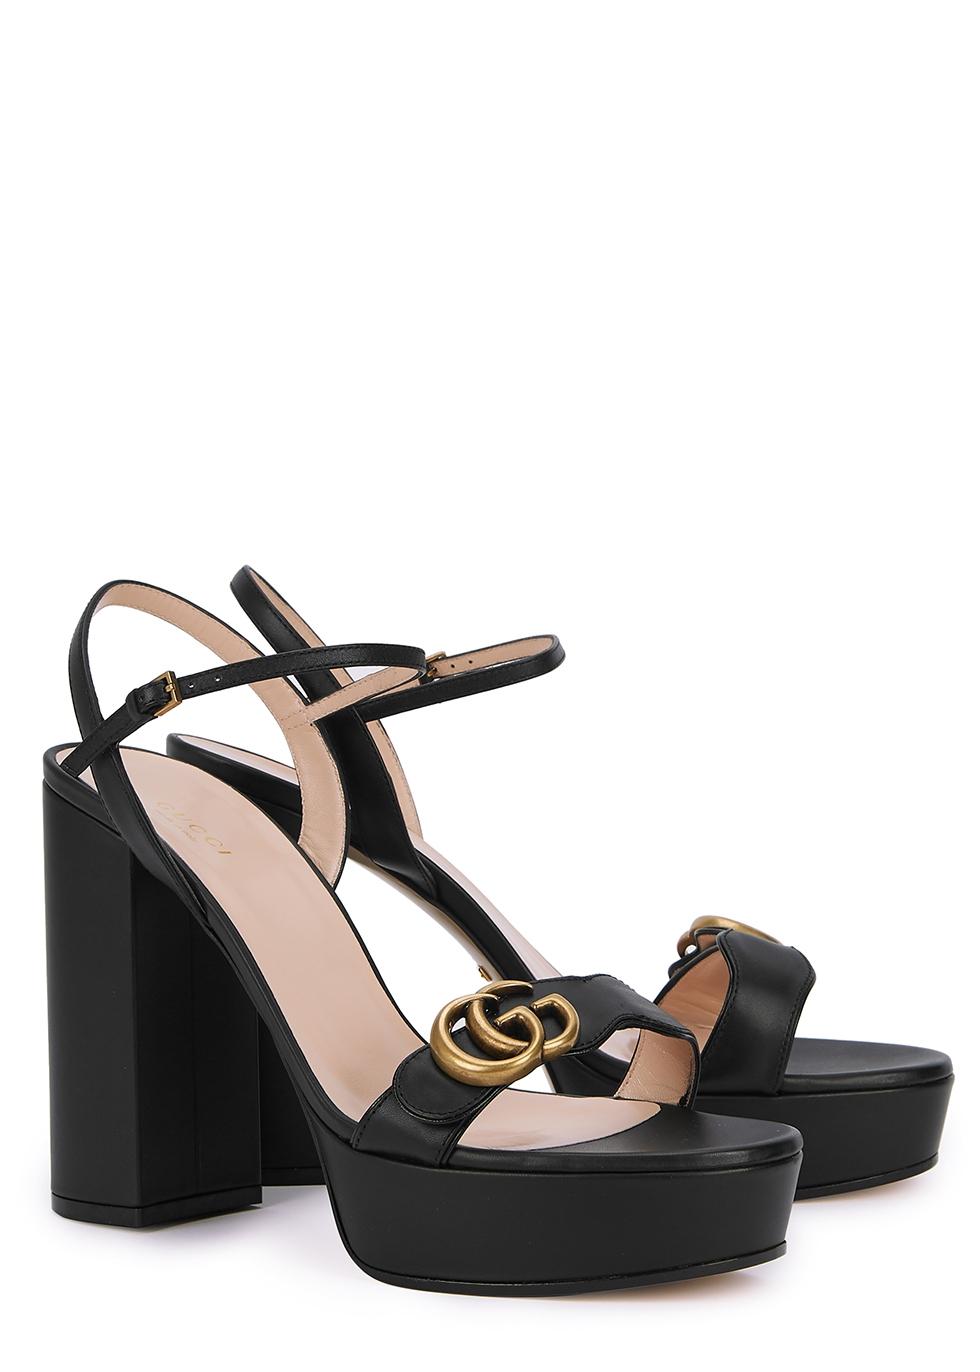 Gucci Platform Sandal With Double G in Black Leather (Black) - Lyst